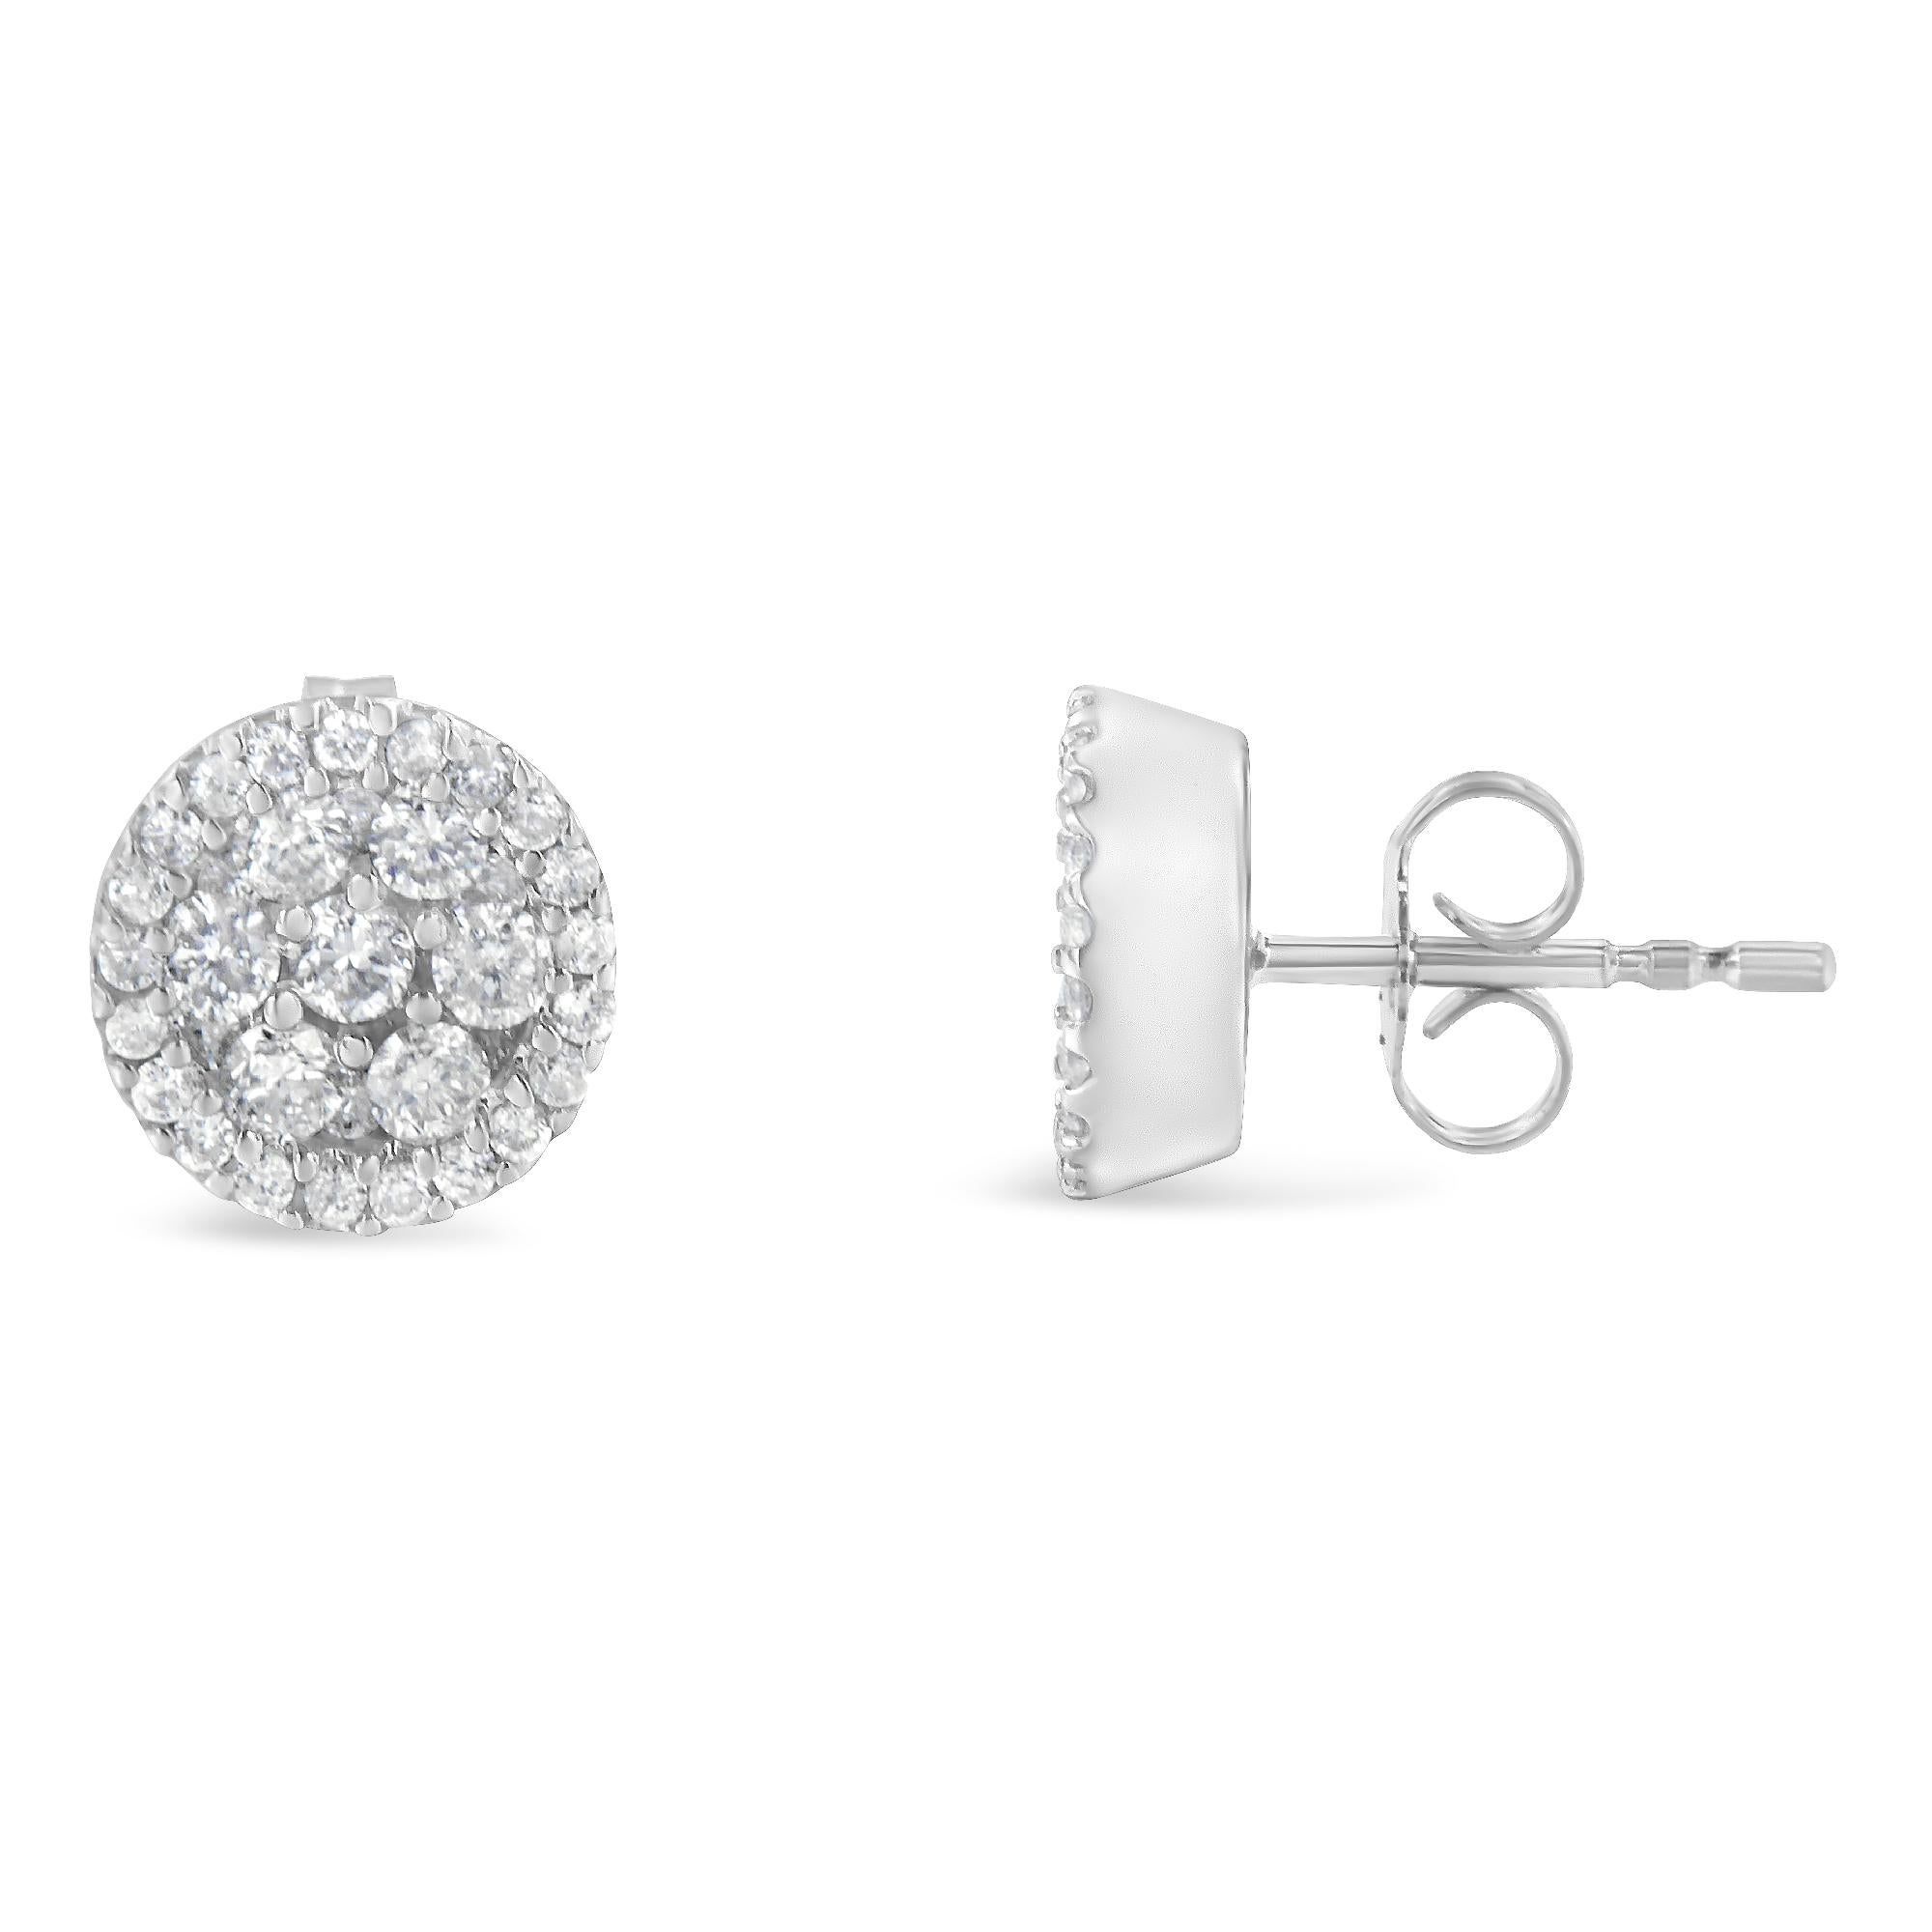 Elegant and timeless, these 14K white gold stud earrings feature round, brilliant cut diamonds in a halo style button shape. The earrings have three circular rows of diamonds with your choice of either ½ or 1.0 carat total weight worth of diamonds.